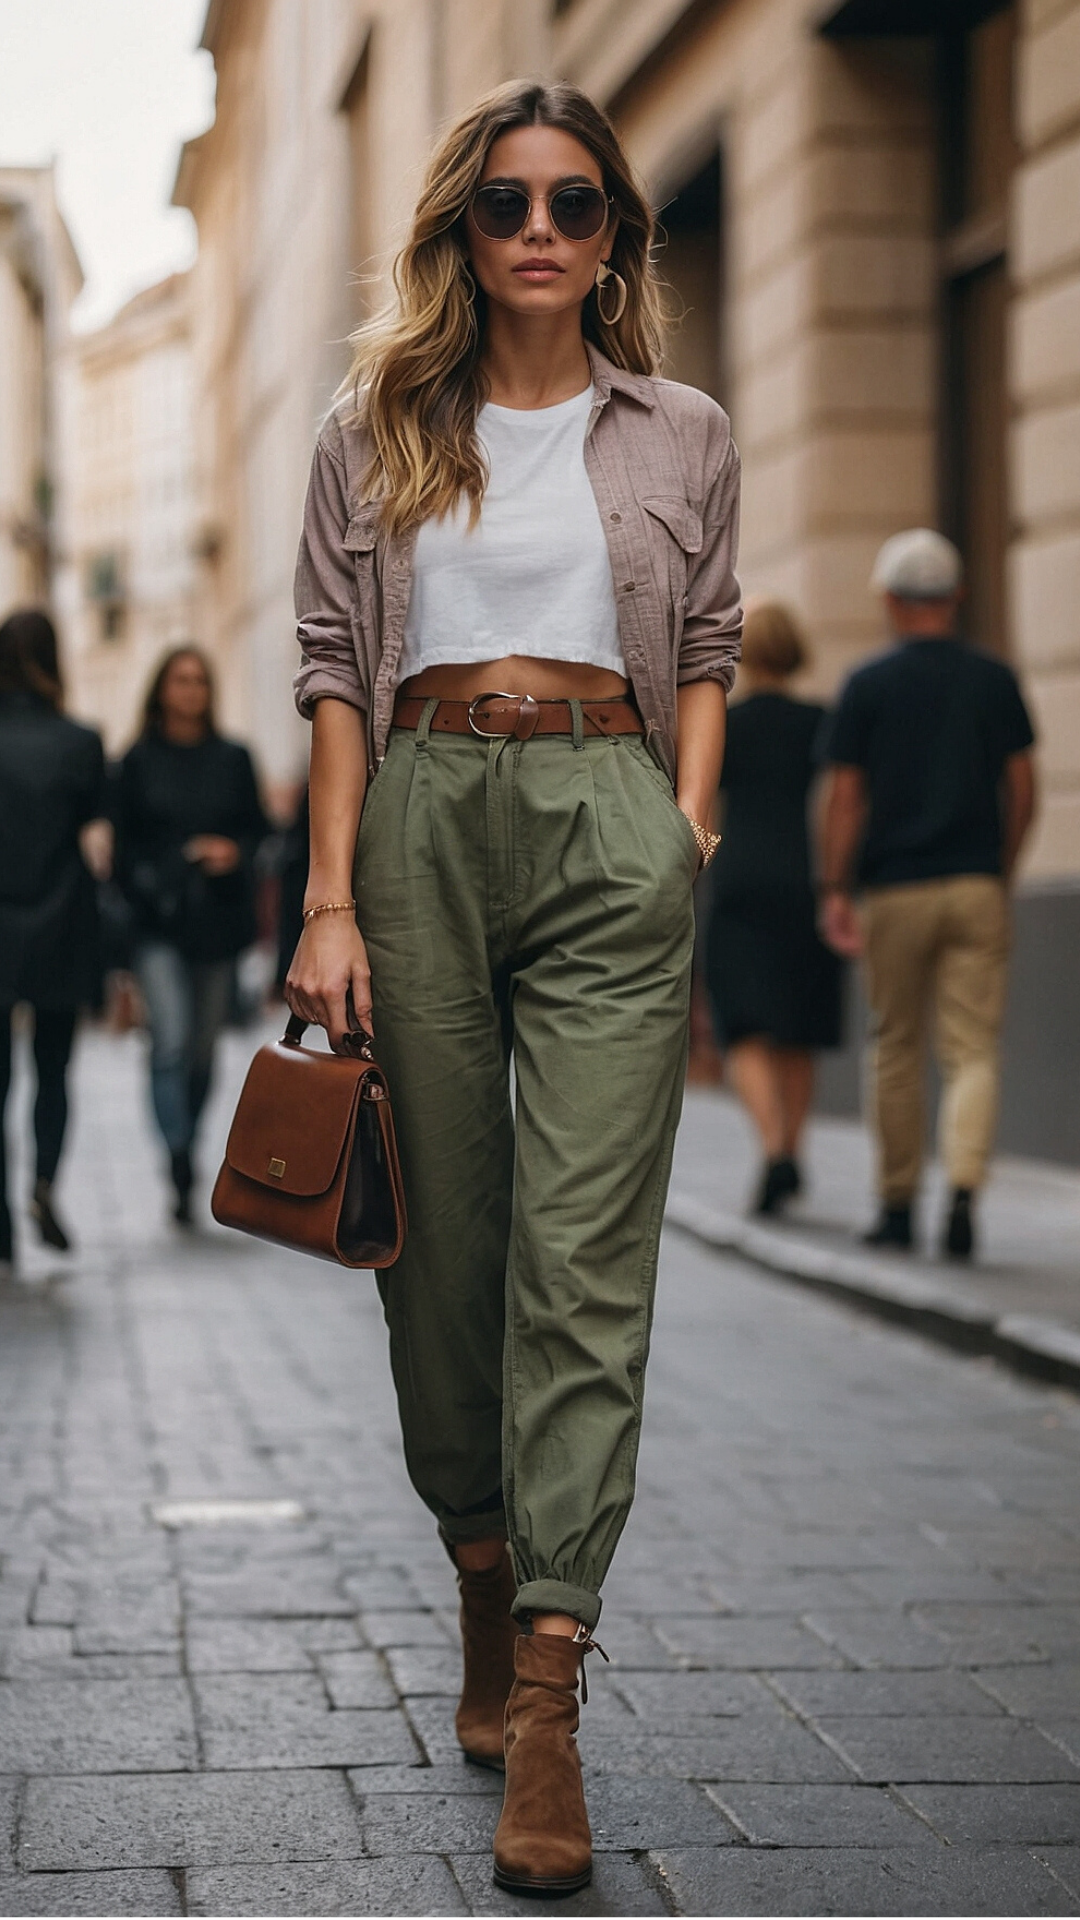 Mix-and-Match Magic: Women’s Comfy Street Style